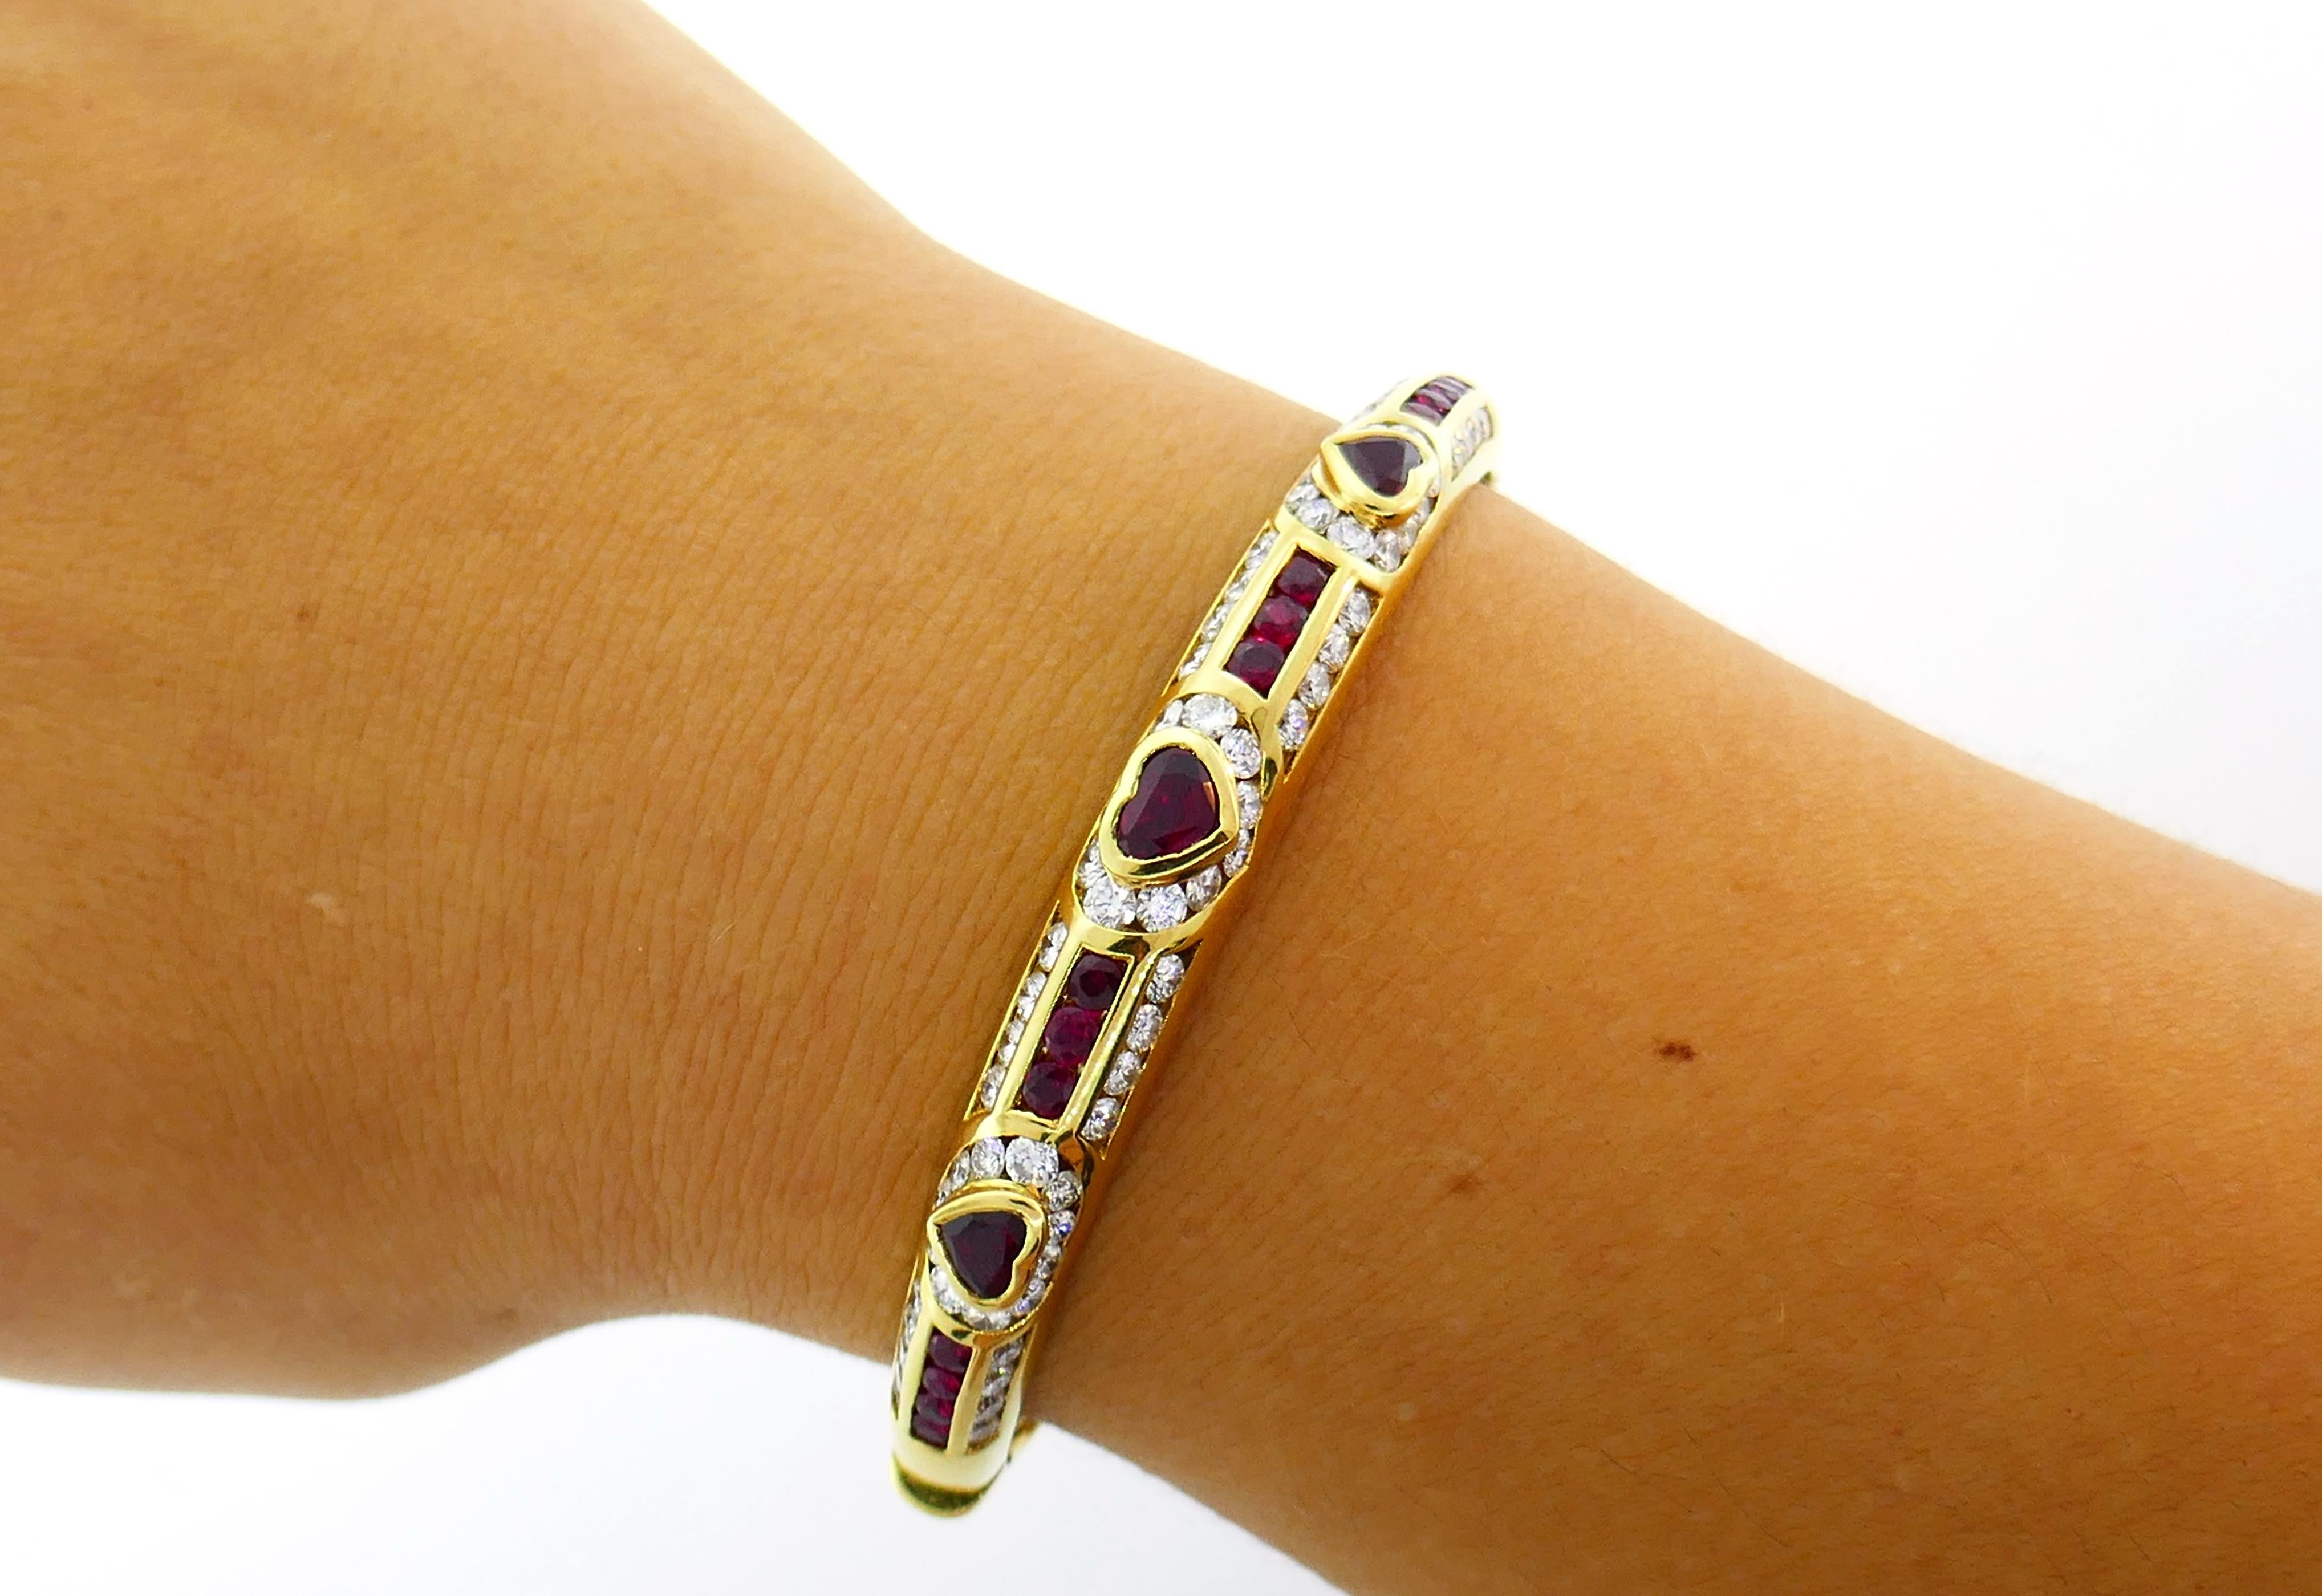 Elegant feminine bangle created by Fred Paris in the 1970s.  Made of 18 karat yellow gold, the bangle features three heart cut rubies accented with  3.35 carats round brilliant cut diamonds (F-G/VS1) and 2.50 carats round faceted rubies.